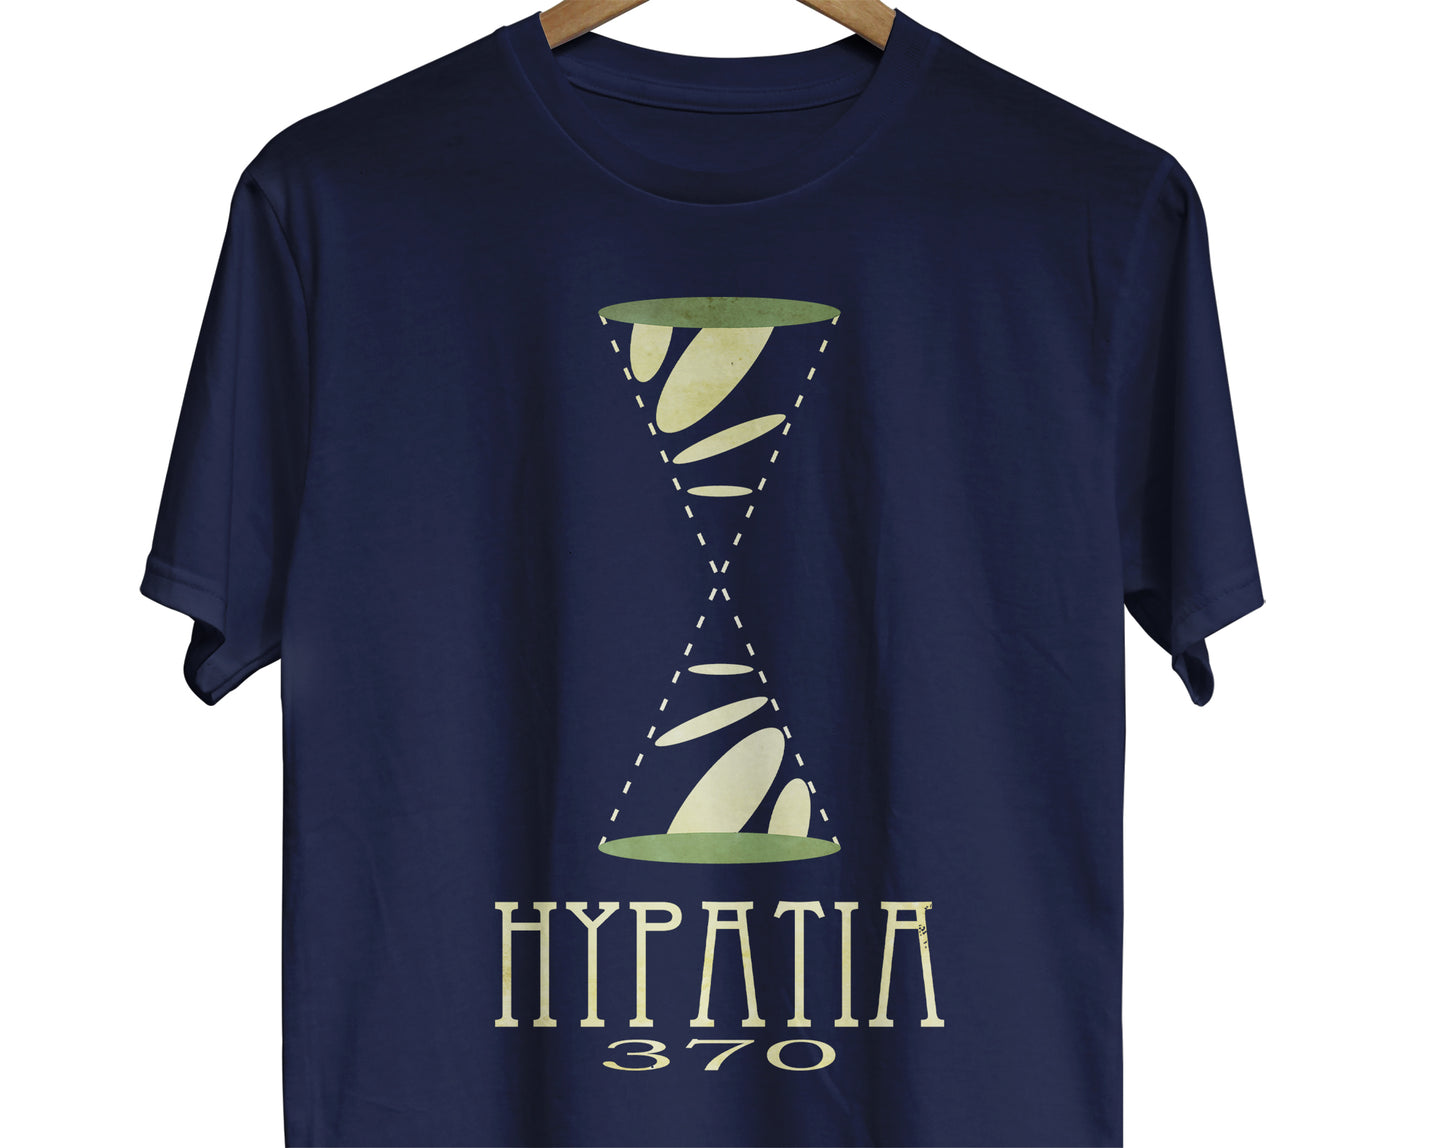 Hypatia math t-shirt with conic sections illustration